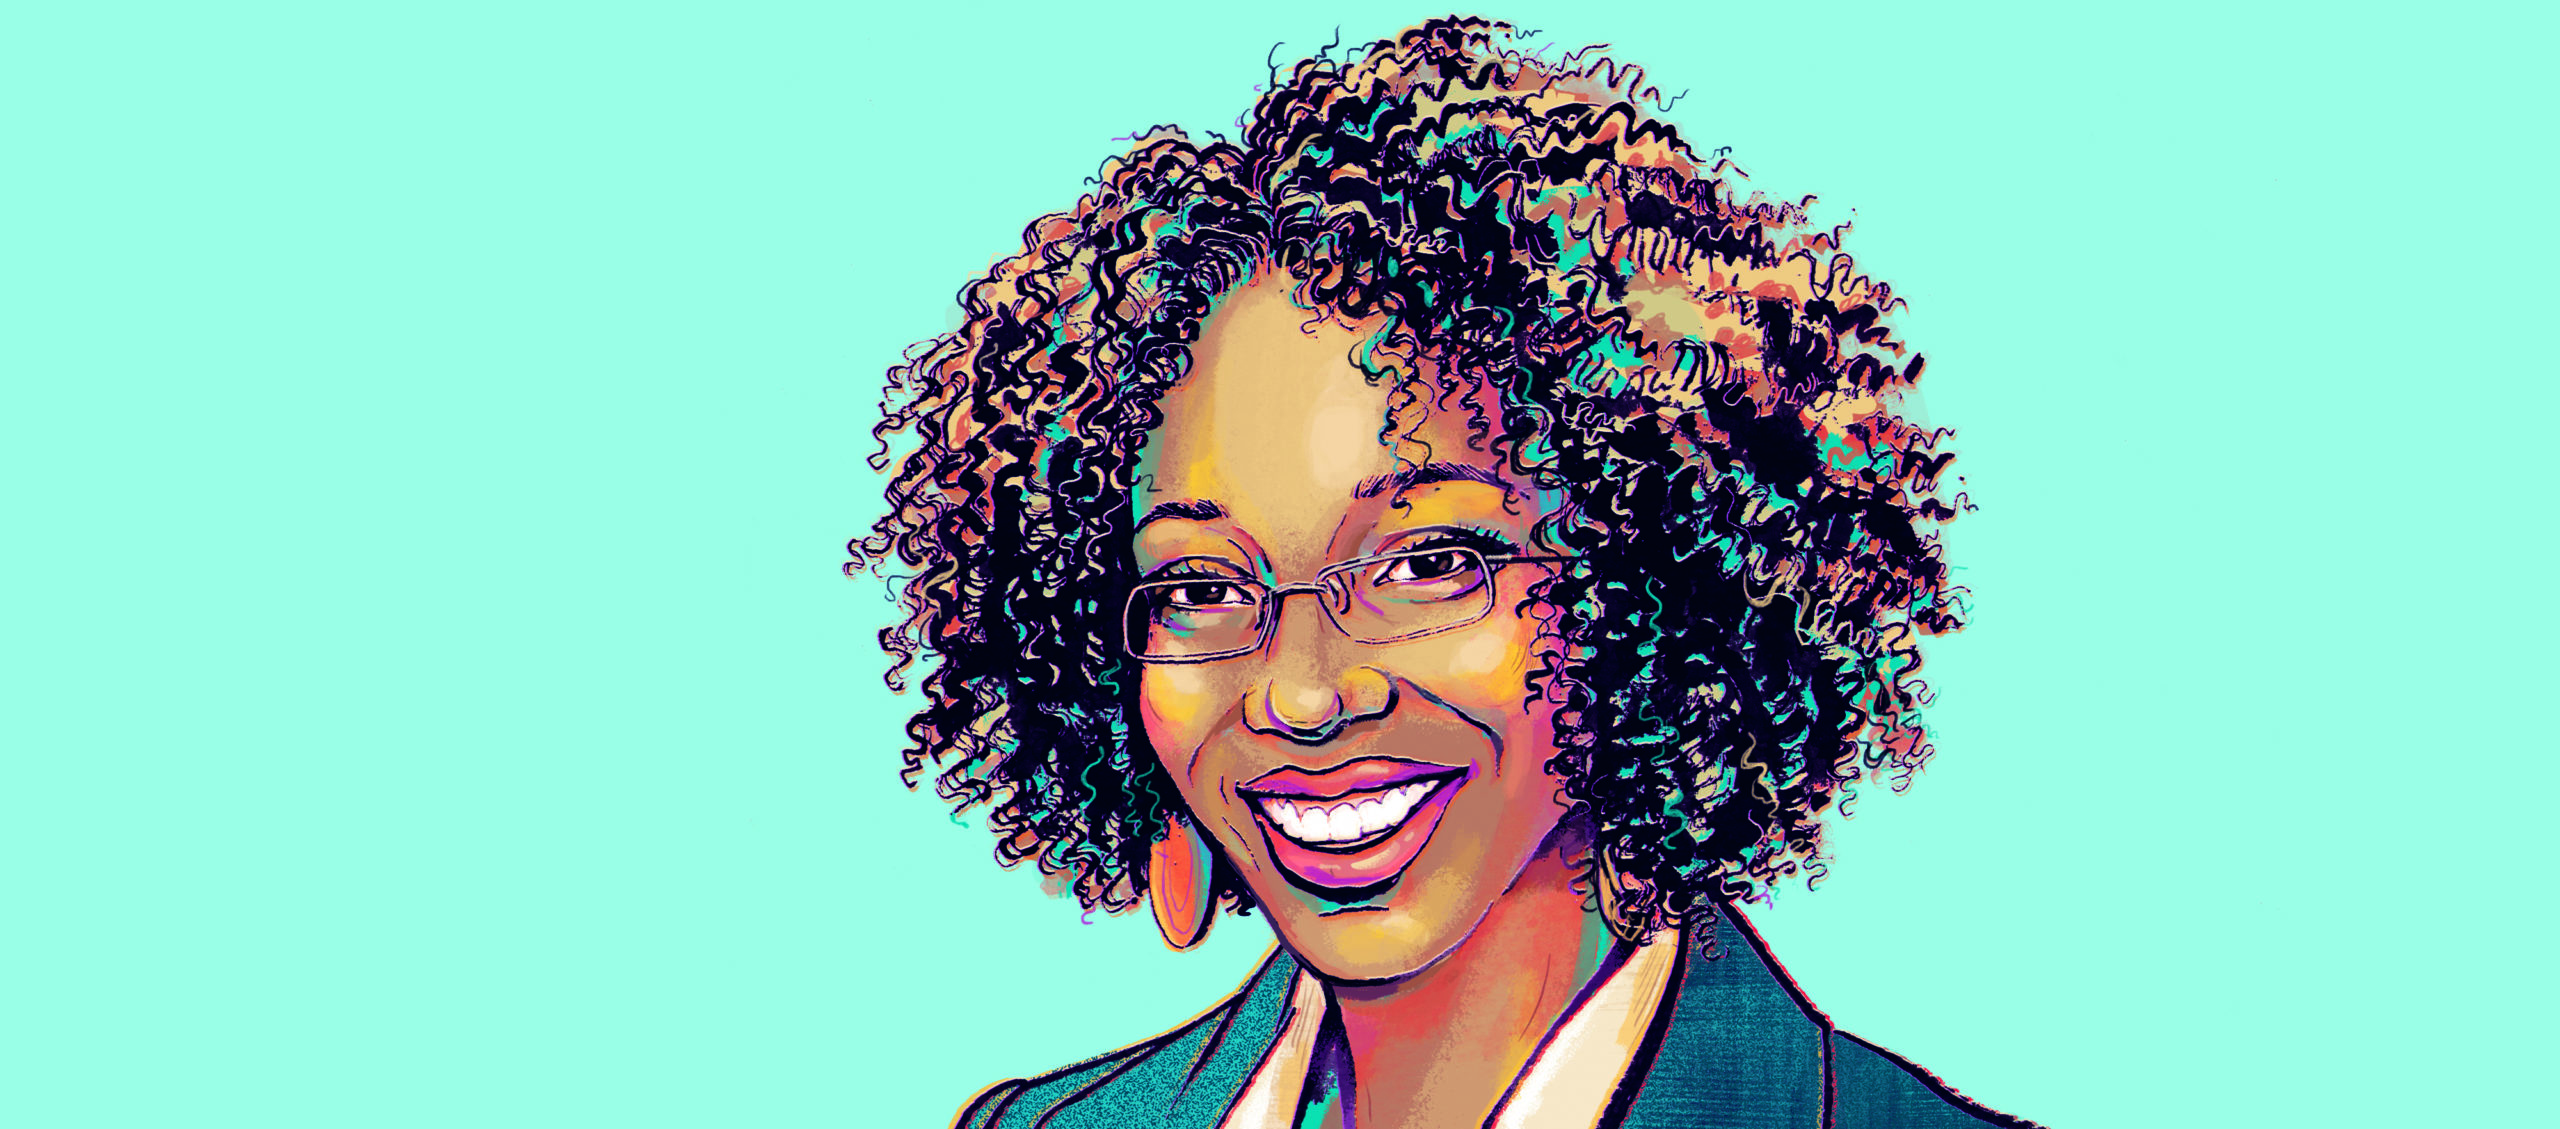 Colourful illustration of Michelle Jackson-Forbes